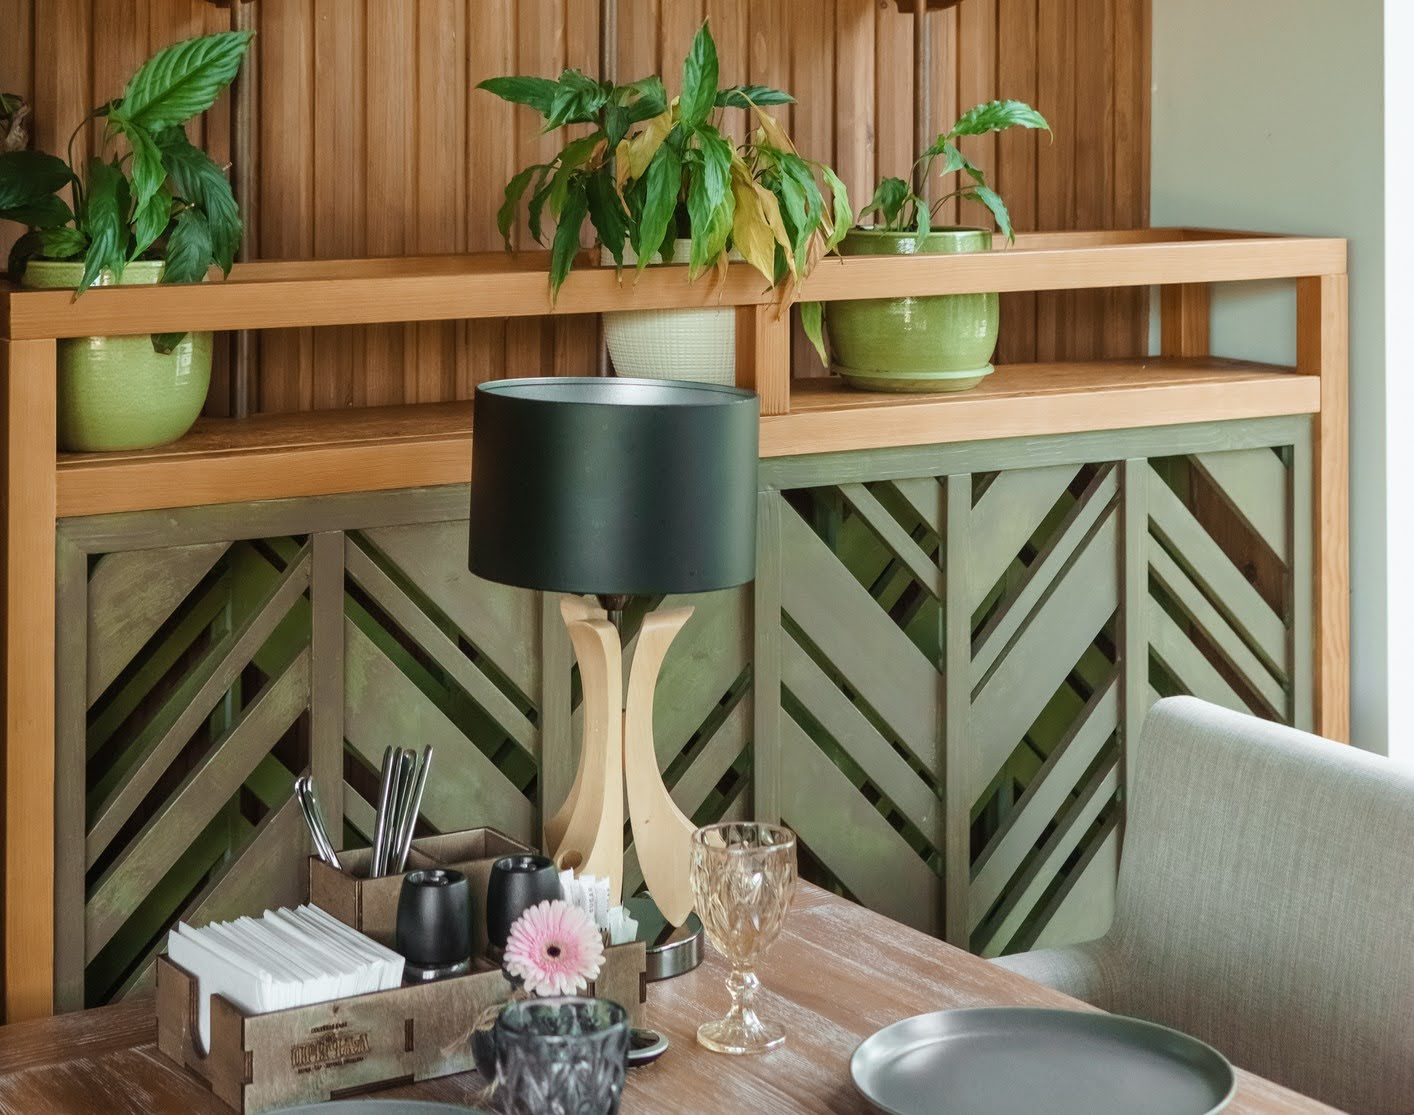 Senior living community dining table setting featuring biophilic interior design with wood paneling in organic natural pattern in background.